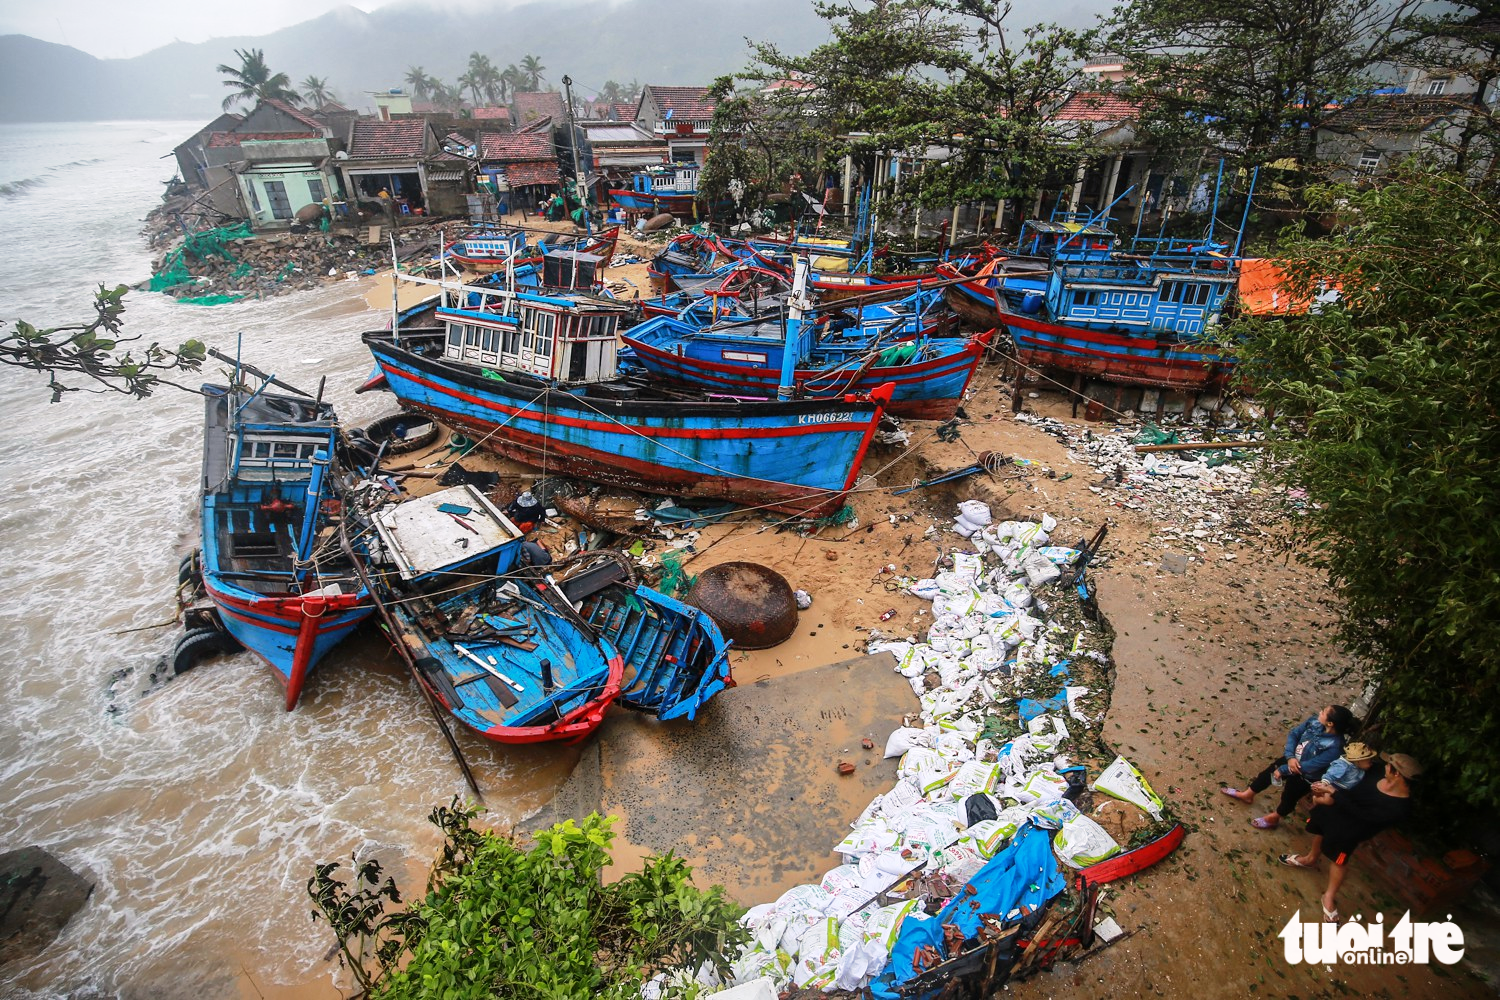 Fishing boats are damaged in Dai Lanh Commune, Van Ninh District, in the south-central province of Khanh Hoa. Photo: Tuoi Tre